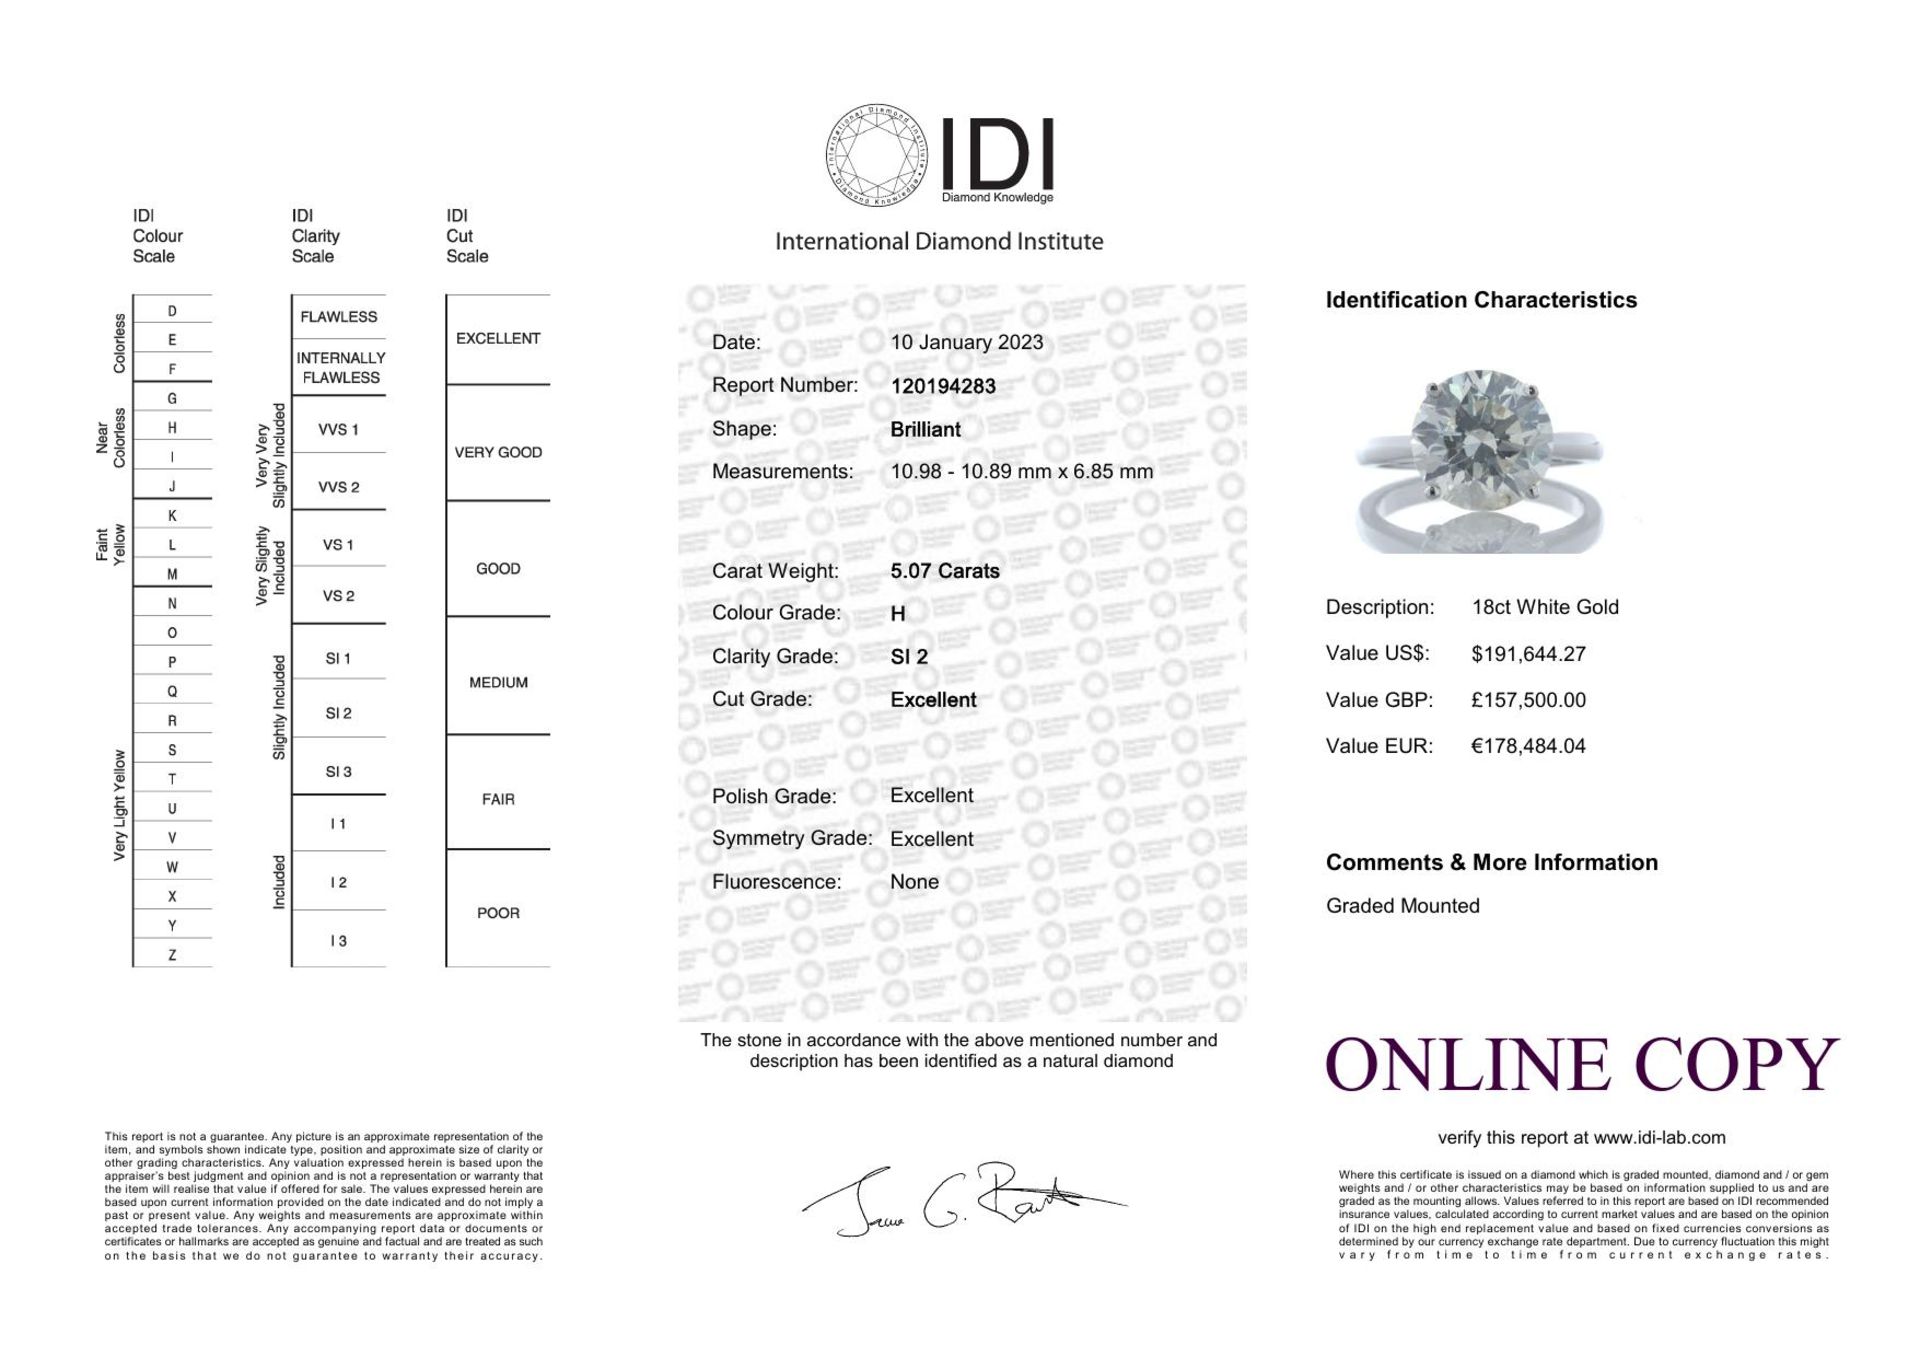 18ct White Gold Single Stone Prong Set Diamond Ring 5.07 Carats - Valued By IDI £157,500.00 - A - Image 6 of 6